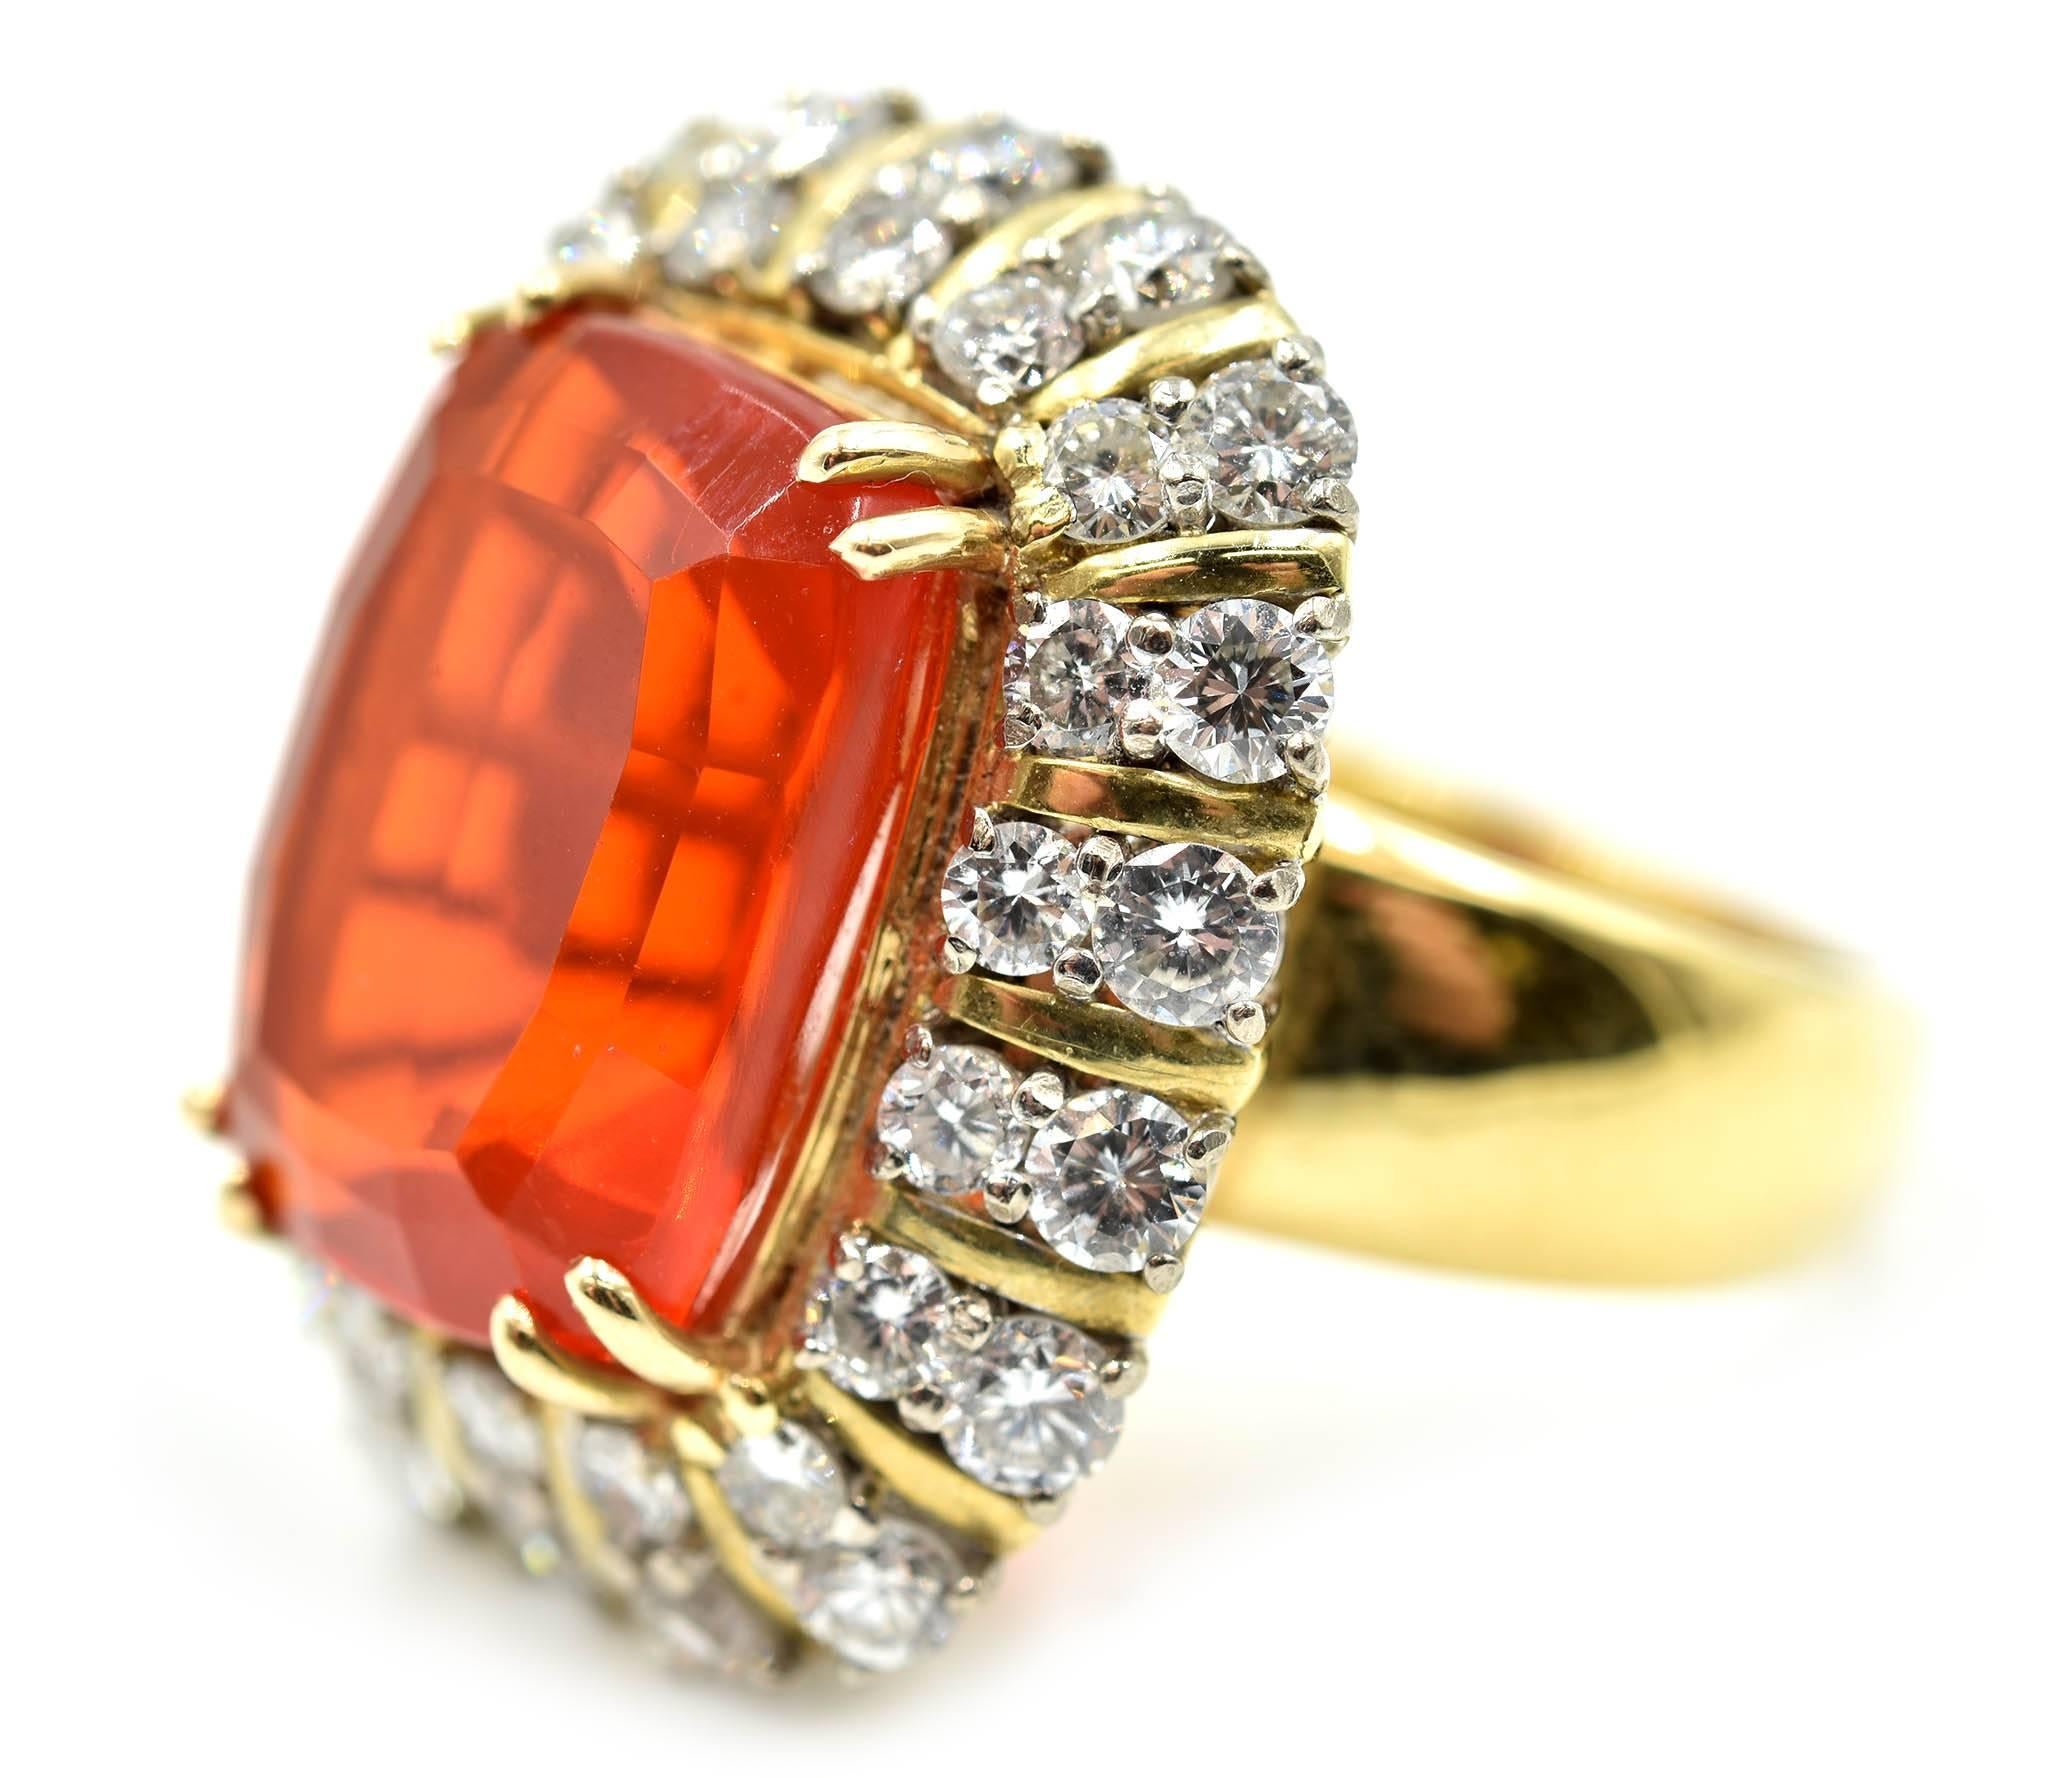 Designer: custom design
Material: 14k yellow gold
Mexican Fire Opal: cushion cut 6.64 carat
Diamonds: round brilliant 2.70 carat total weight
Color: H
Clarity: VS-SI
Dimensions: top of the ring is 20mm long x 23.74mm in height
Weight: 75.90 grams
